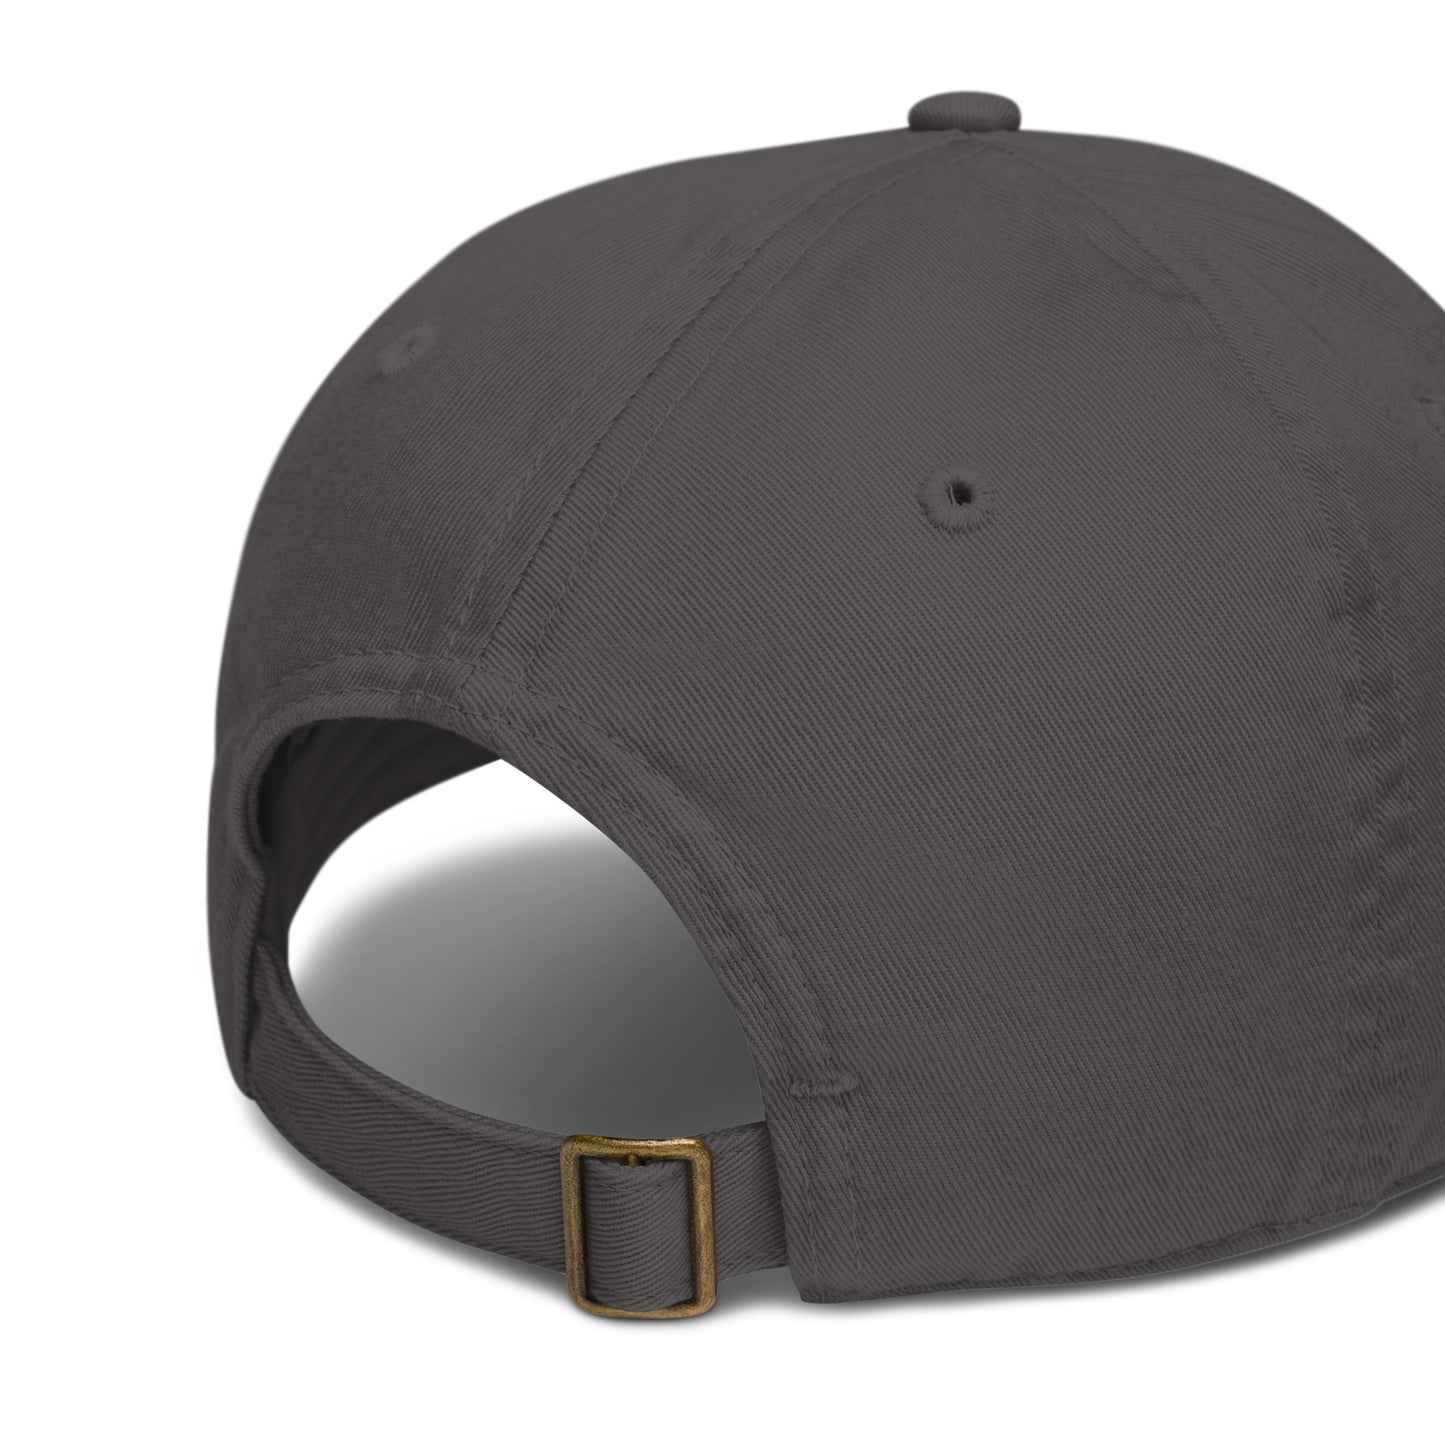 Organic Dad Hat NutriHarvest® for Comfort and Style -available in Oyster, black, charcoal, Jungle, and Pacific